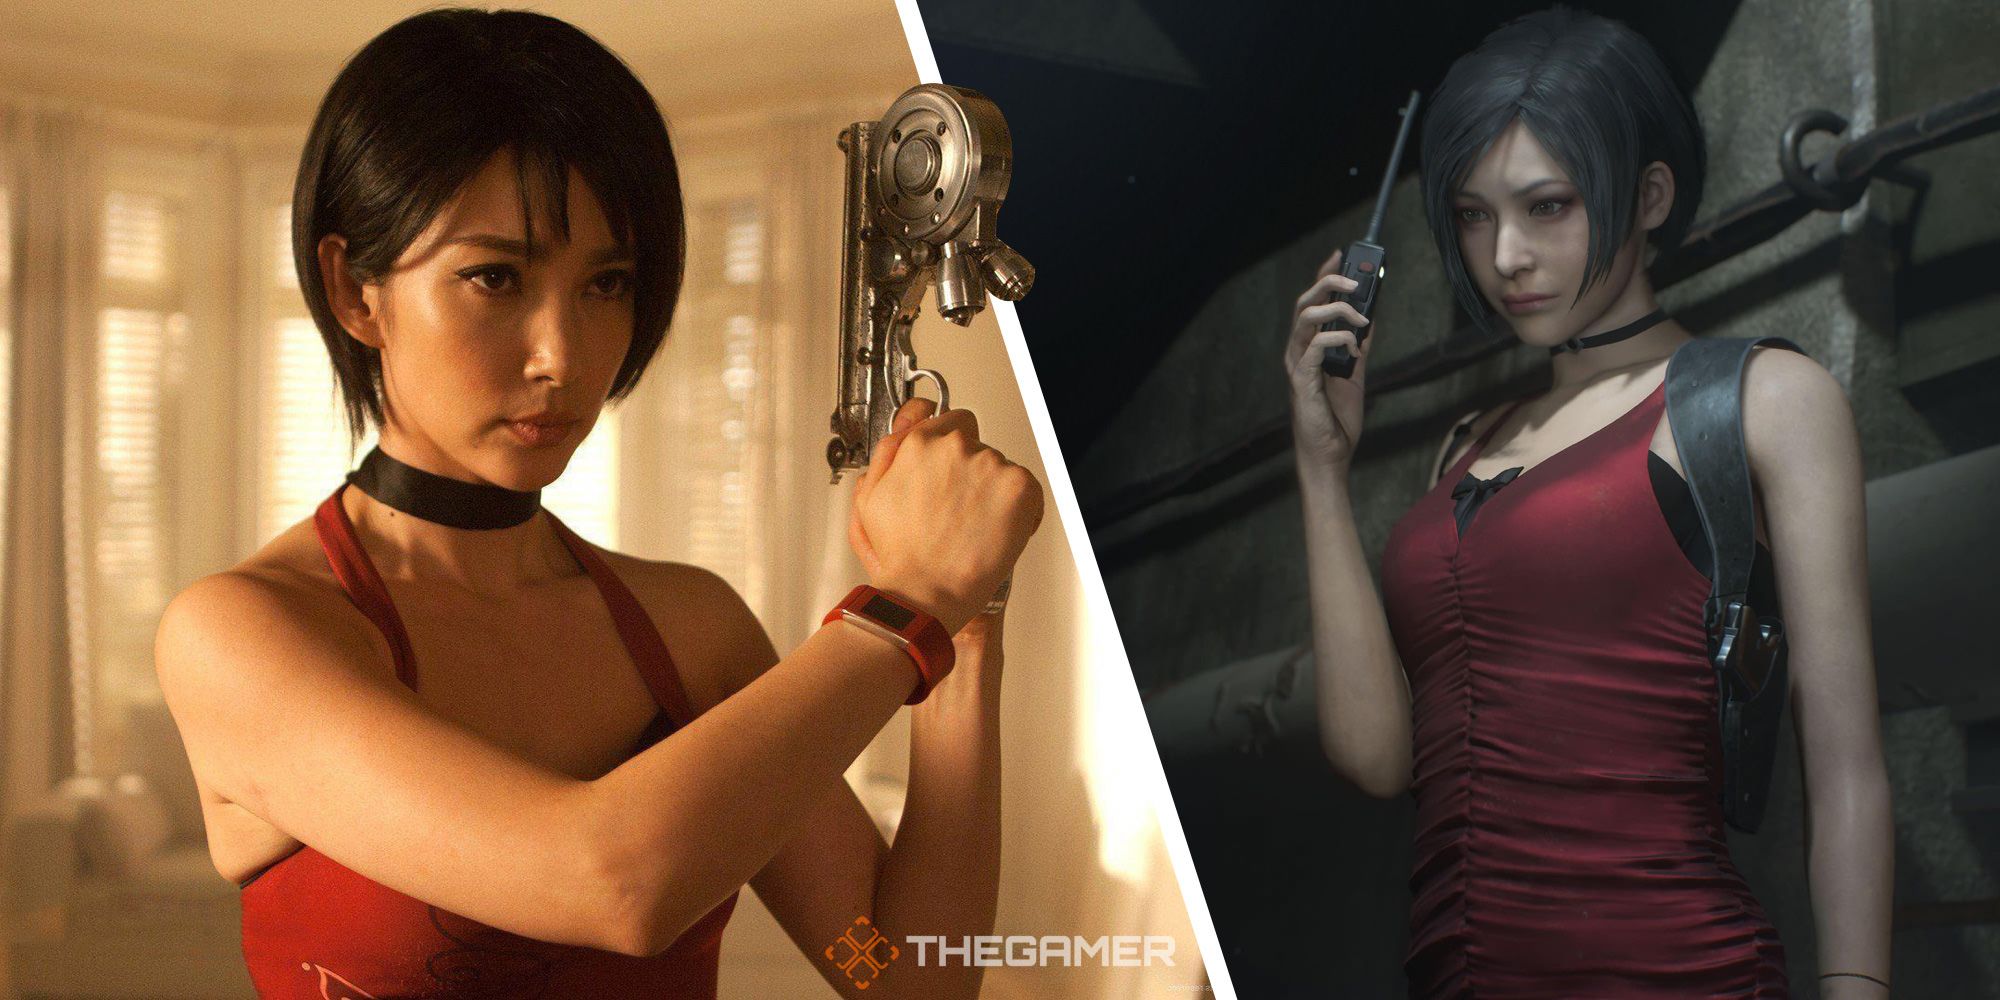 Why The Original Resident Evil Movie Didn't Adapt The Games